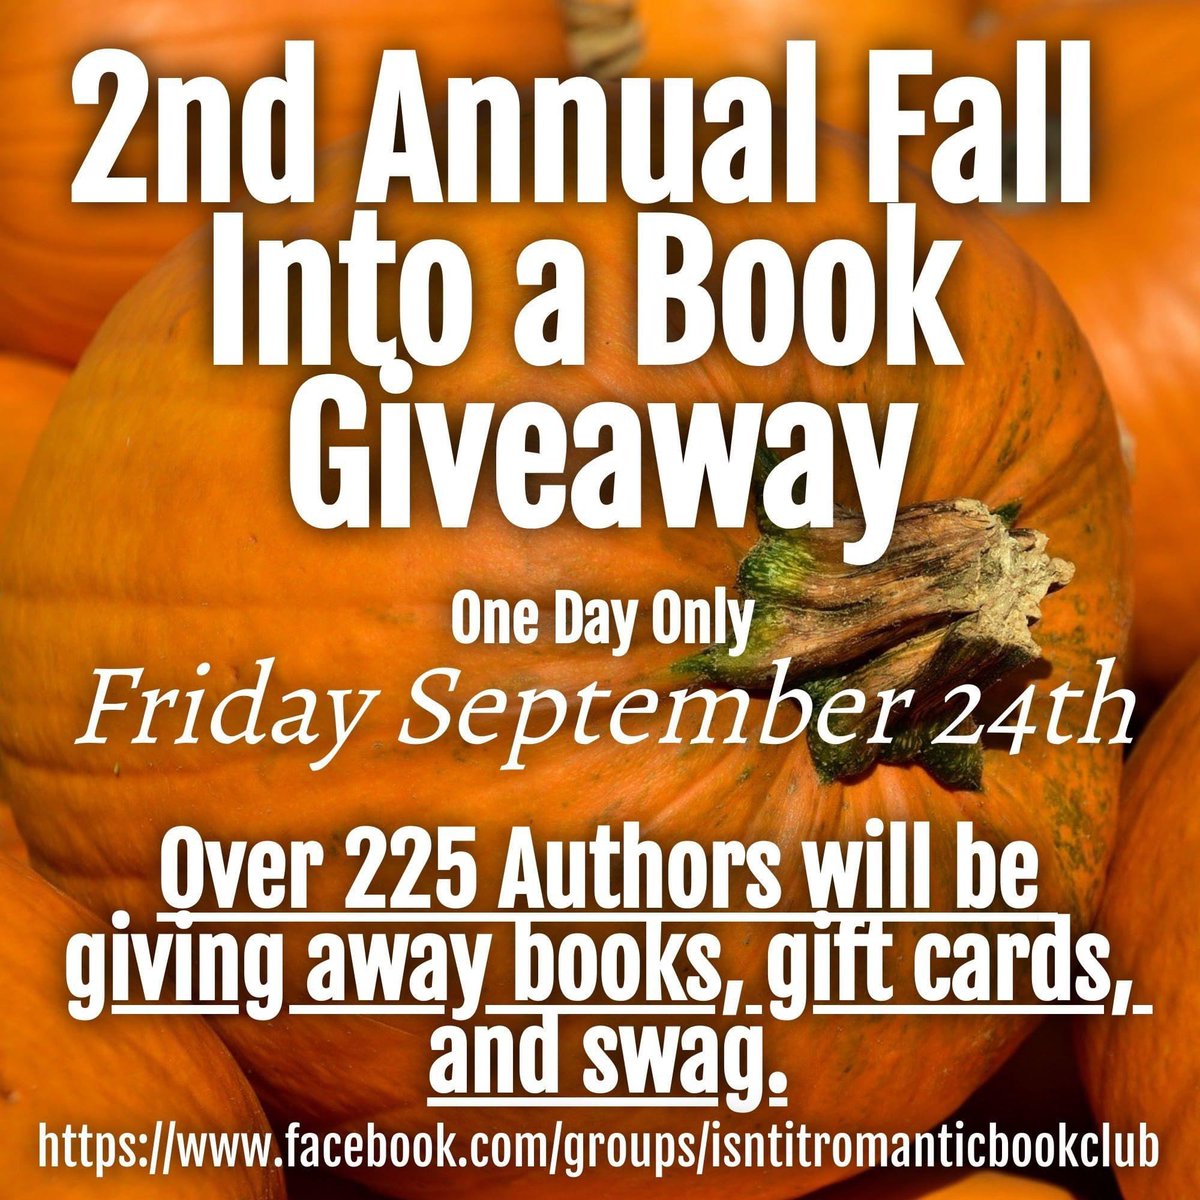 8 days! 

I’ll be doing a #giveaway with 225 fabulous authors! Join us!

facebook.com/groups/isntitr…

#nevertoomanybooks📚 #jointhefun #winnerwinnerchickendinner #giveaways #fallfun🍁 #booksbooksbooks #authorsgalore #somethingforeveryone